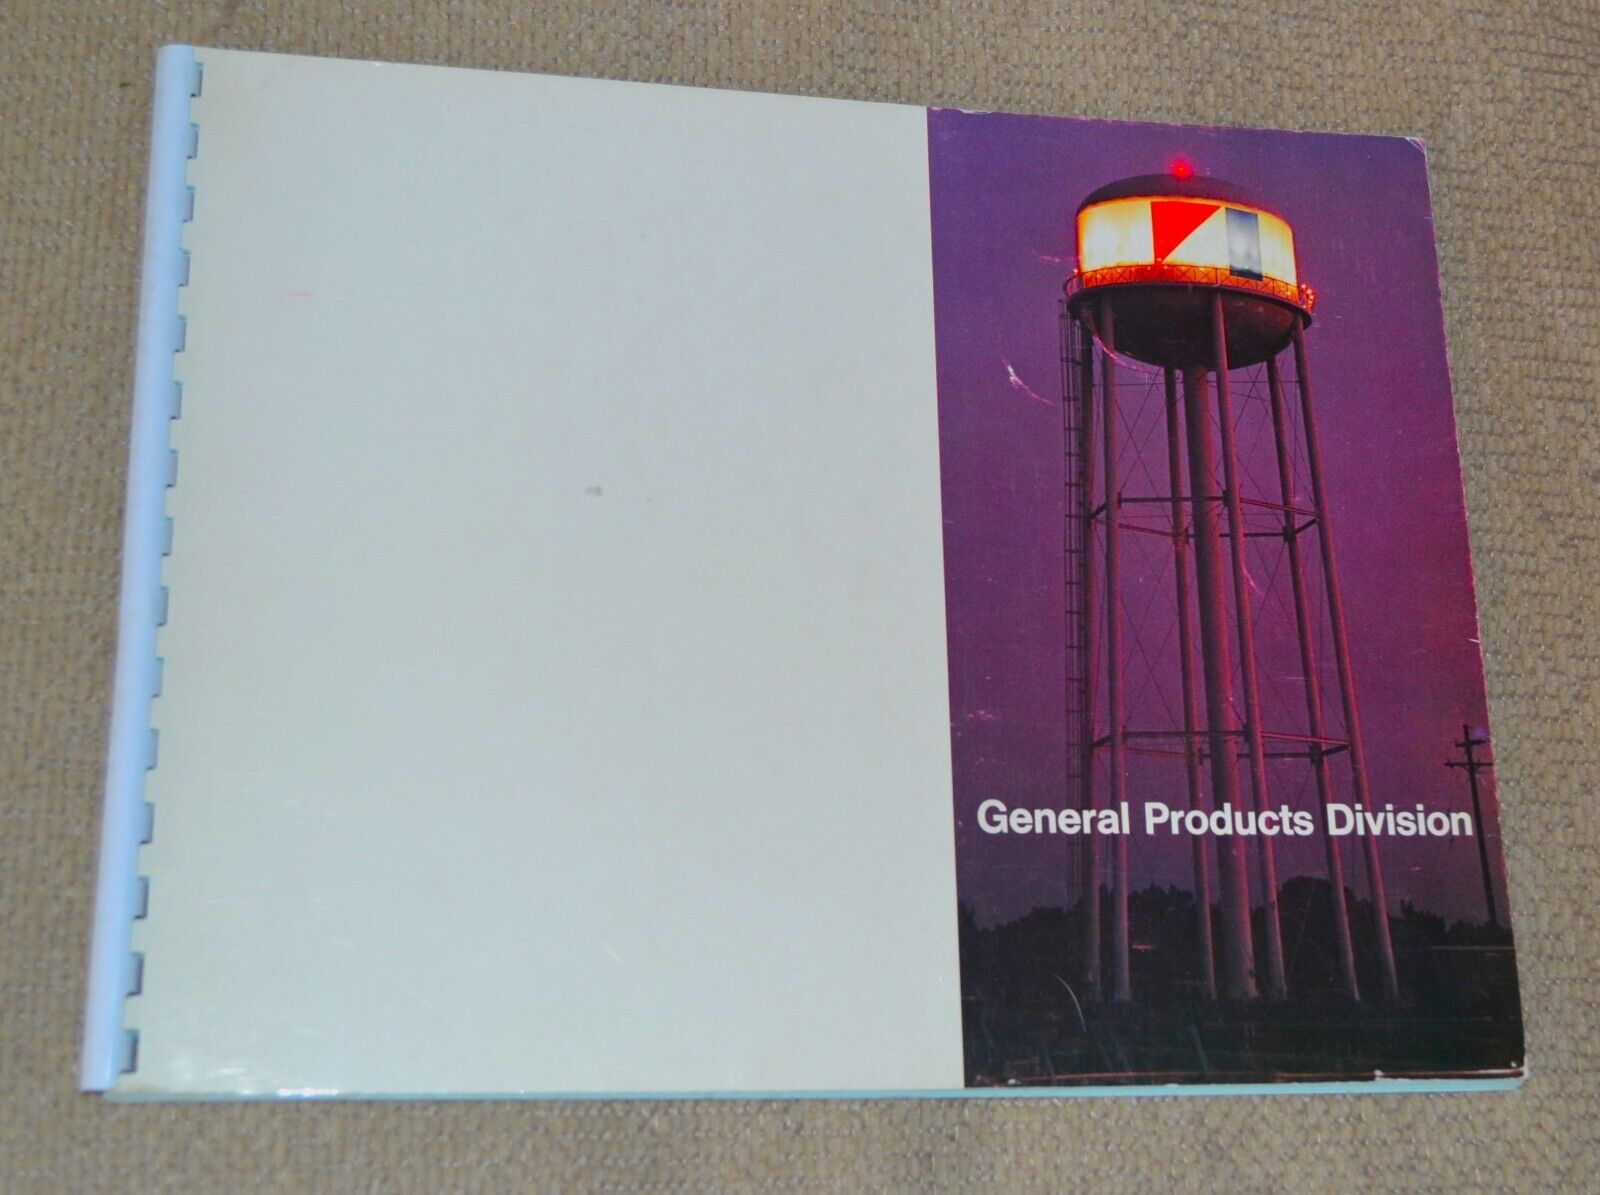 VTG 1970 Jeep Corp General Products Division History Military Vehicles Brochure